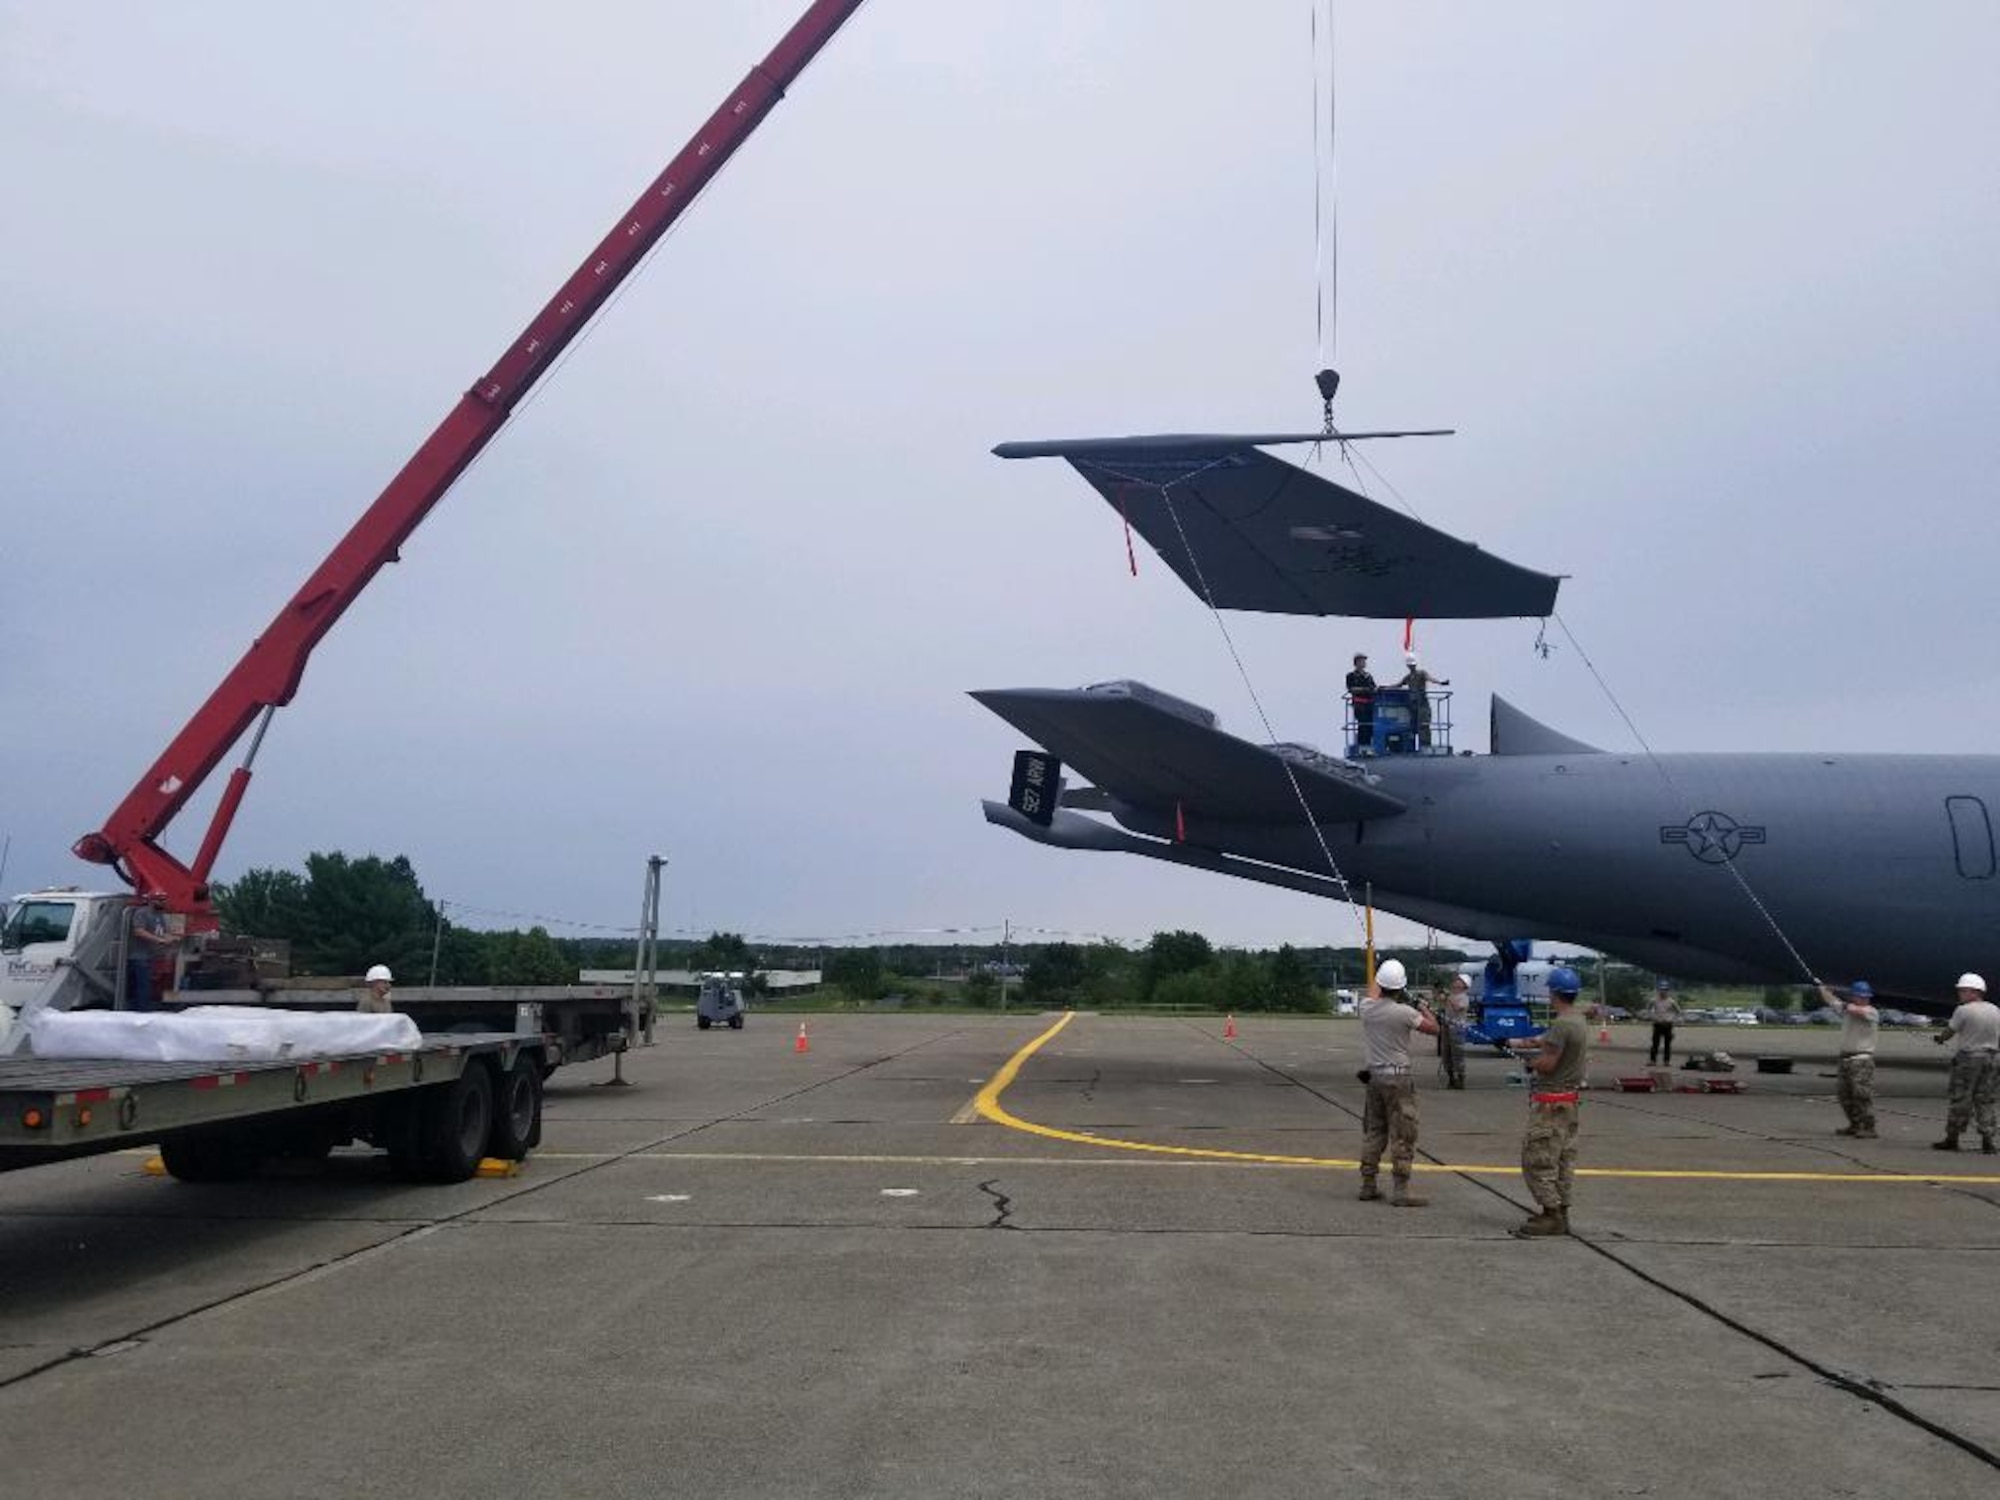 U.S. Air Force Airmen remove the tail of a KC-135 Stratotanker at Bangor Air National Guard Base, Maine, July 2019.